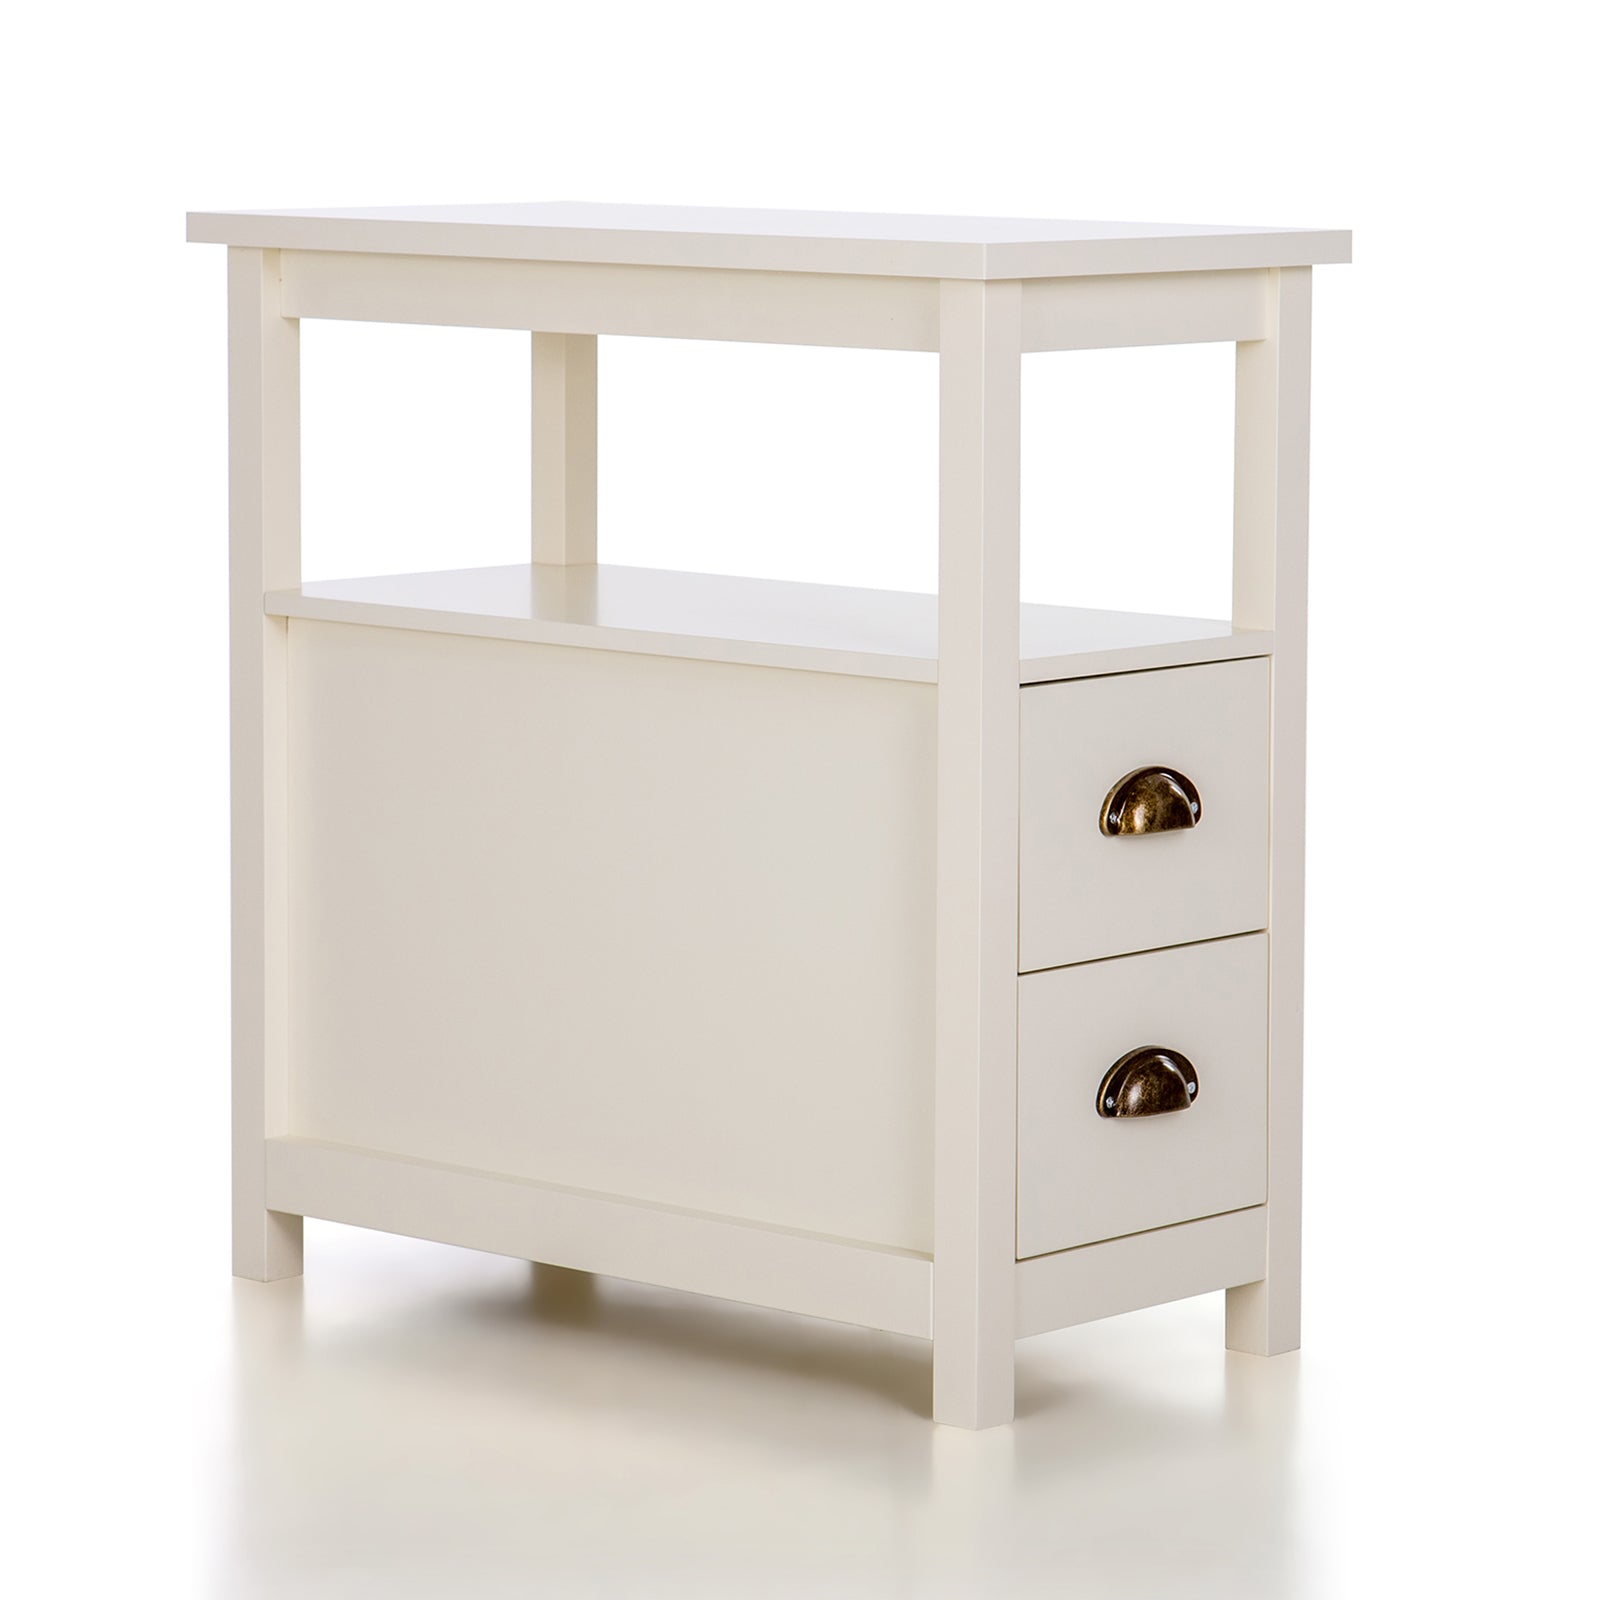 MFSTUDIO Nightstand/End Table with 2 Storage Drawers and 1 Open Shelf for Small Space